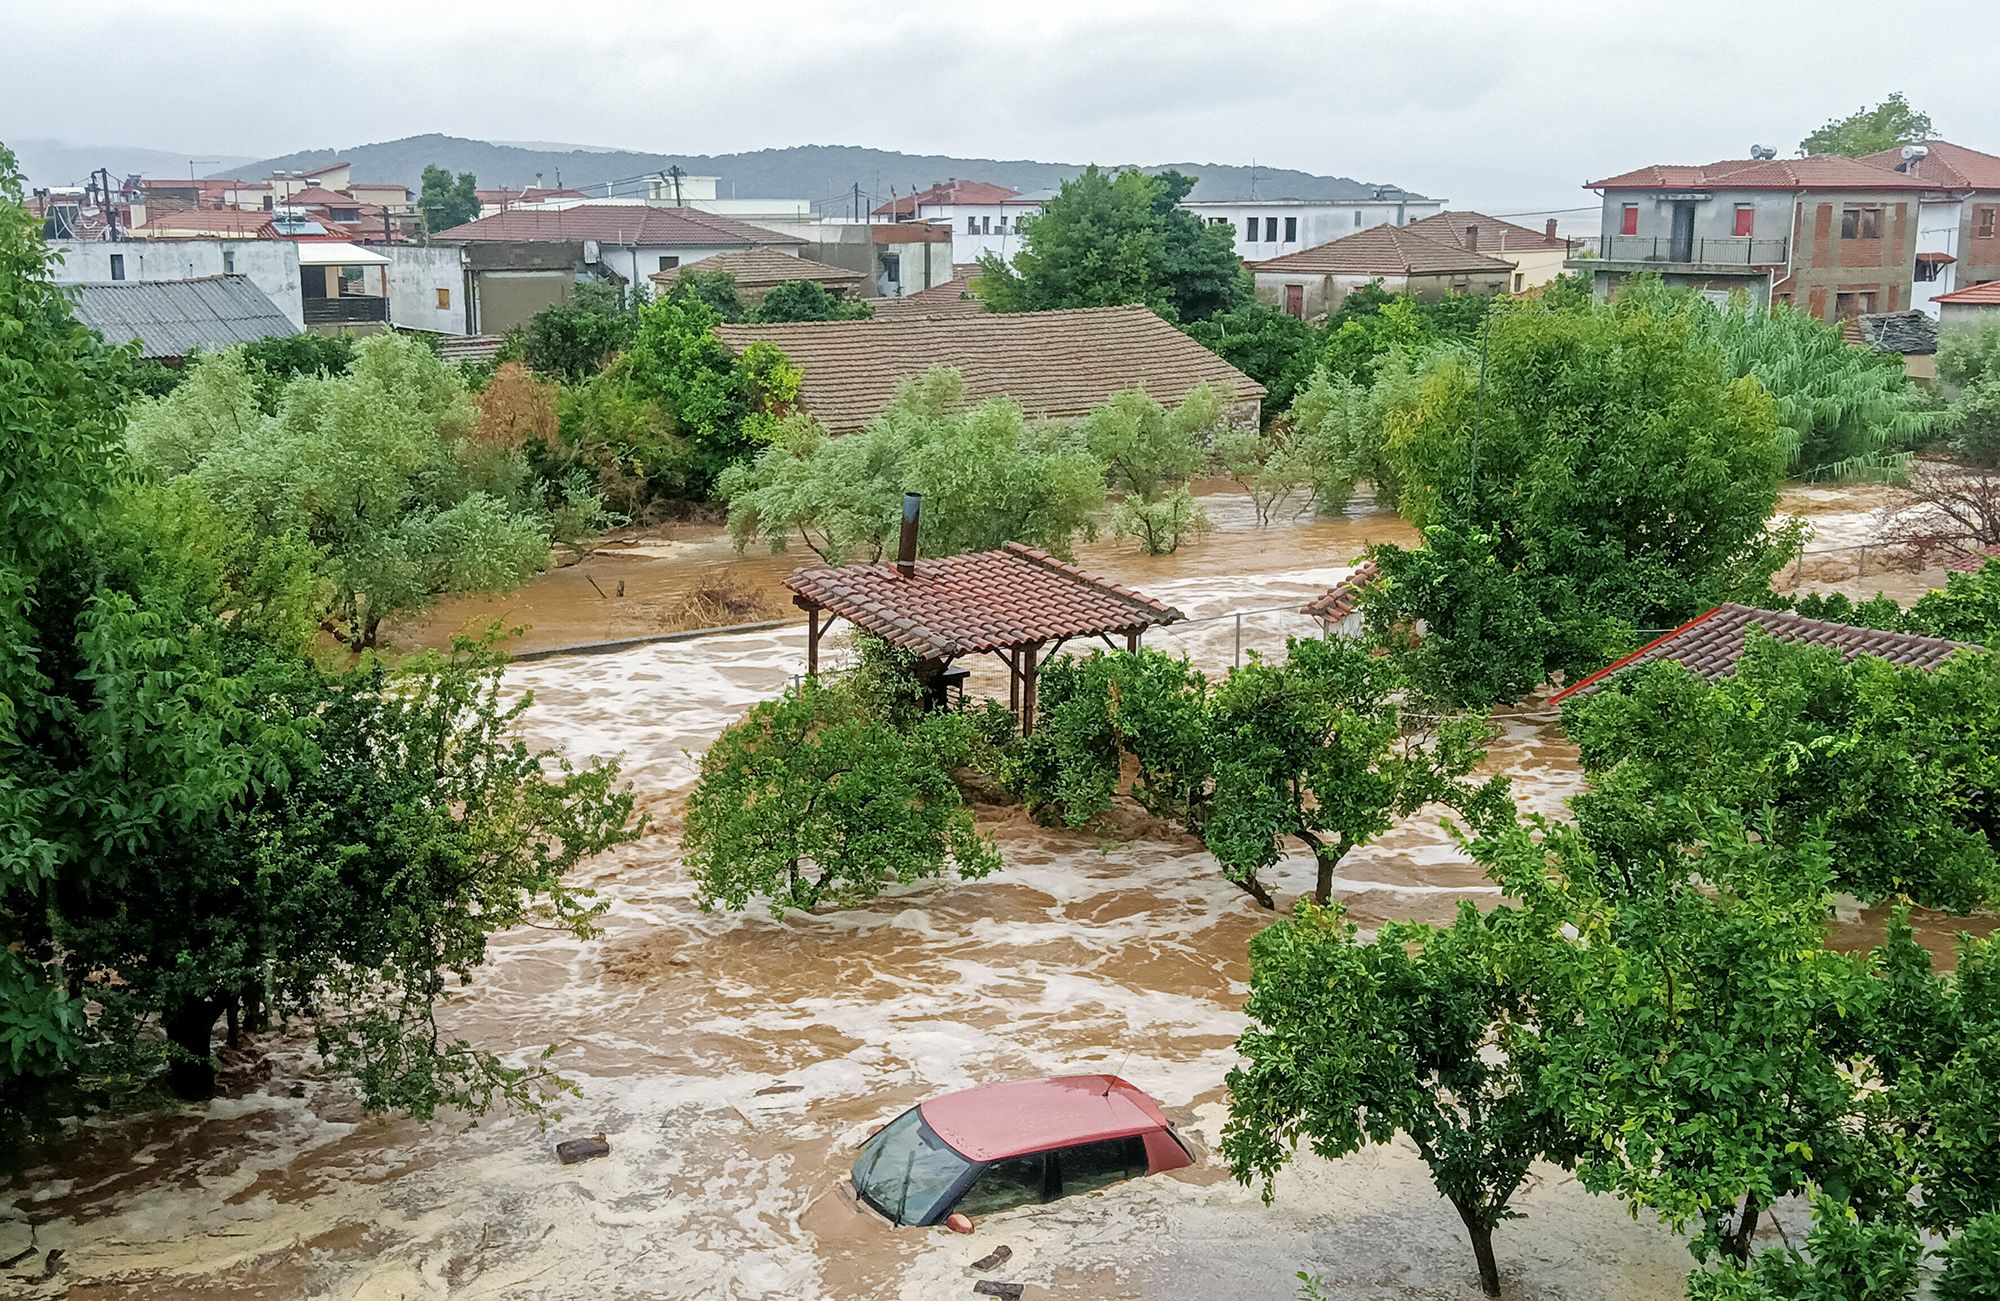 Greece Floods Kill At Least One As Country Deals With Totally Severe Weather